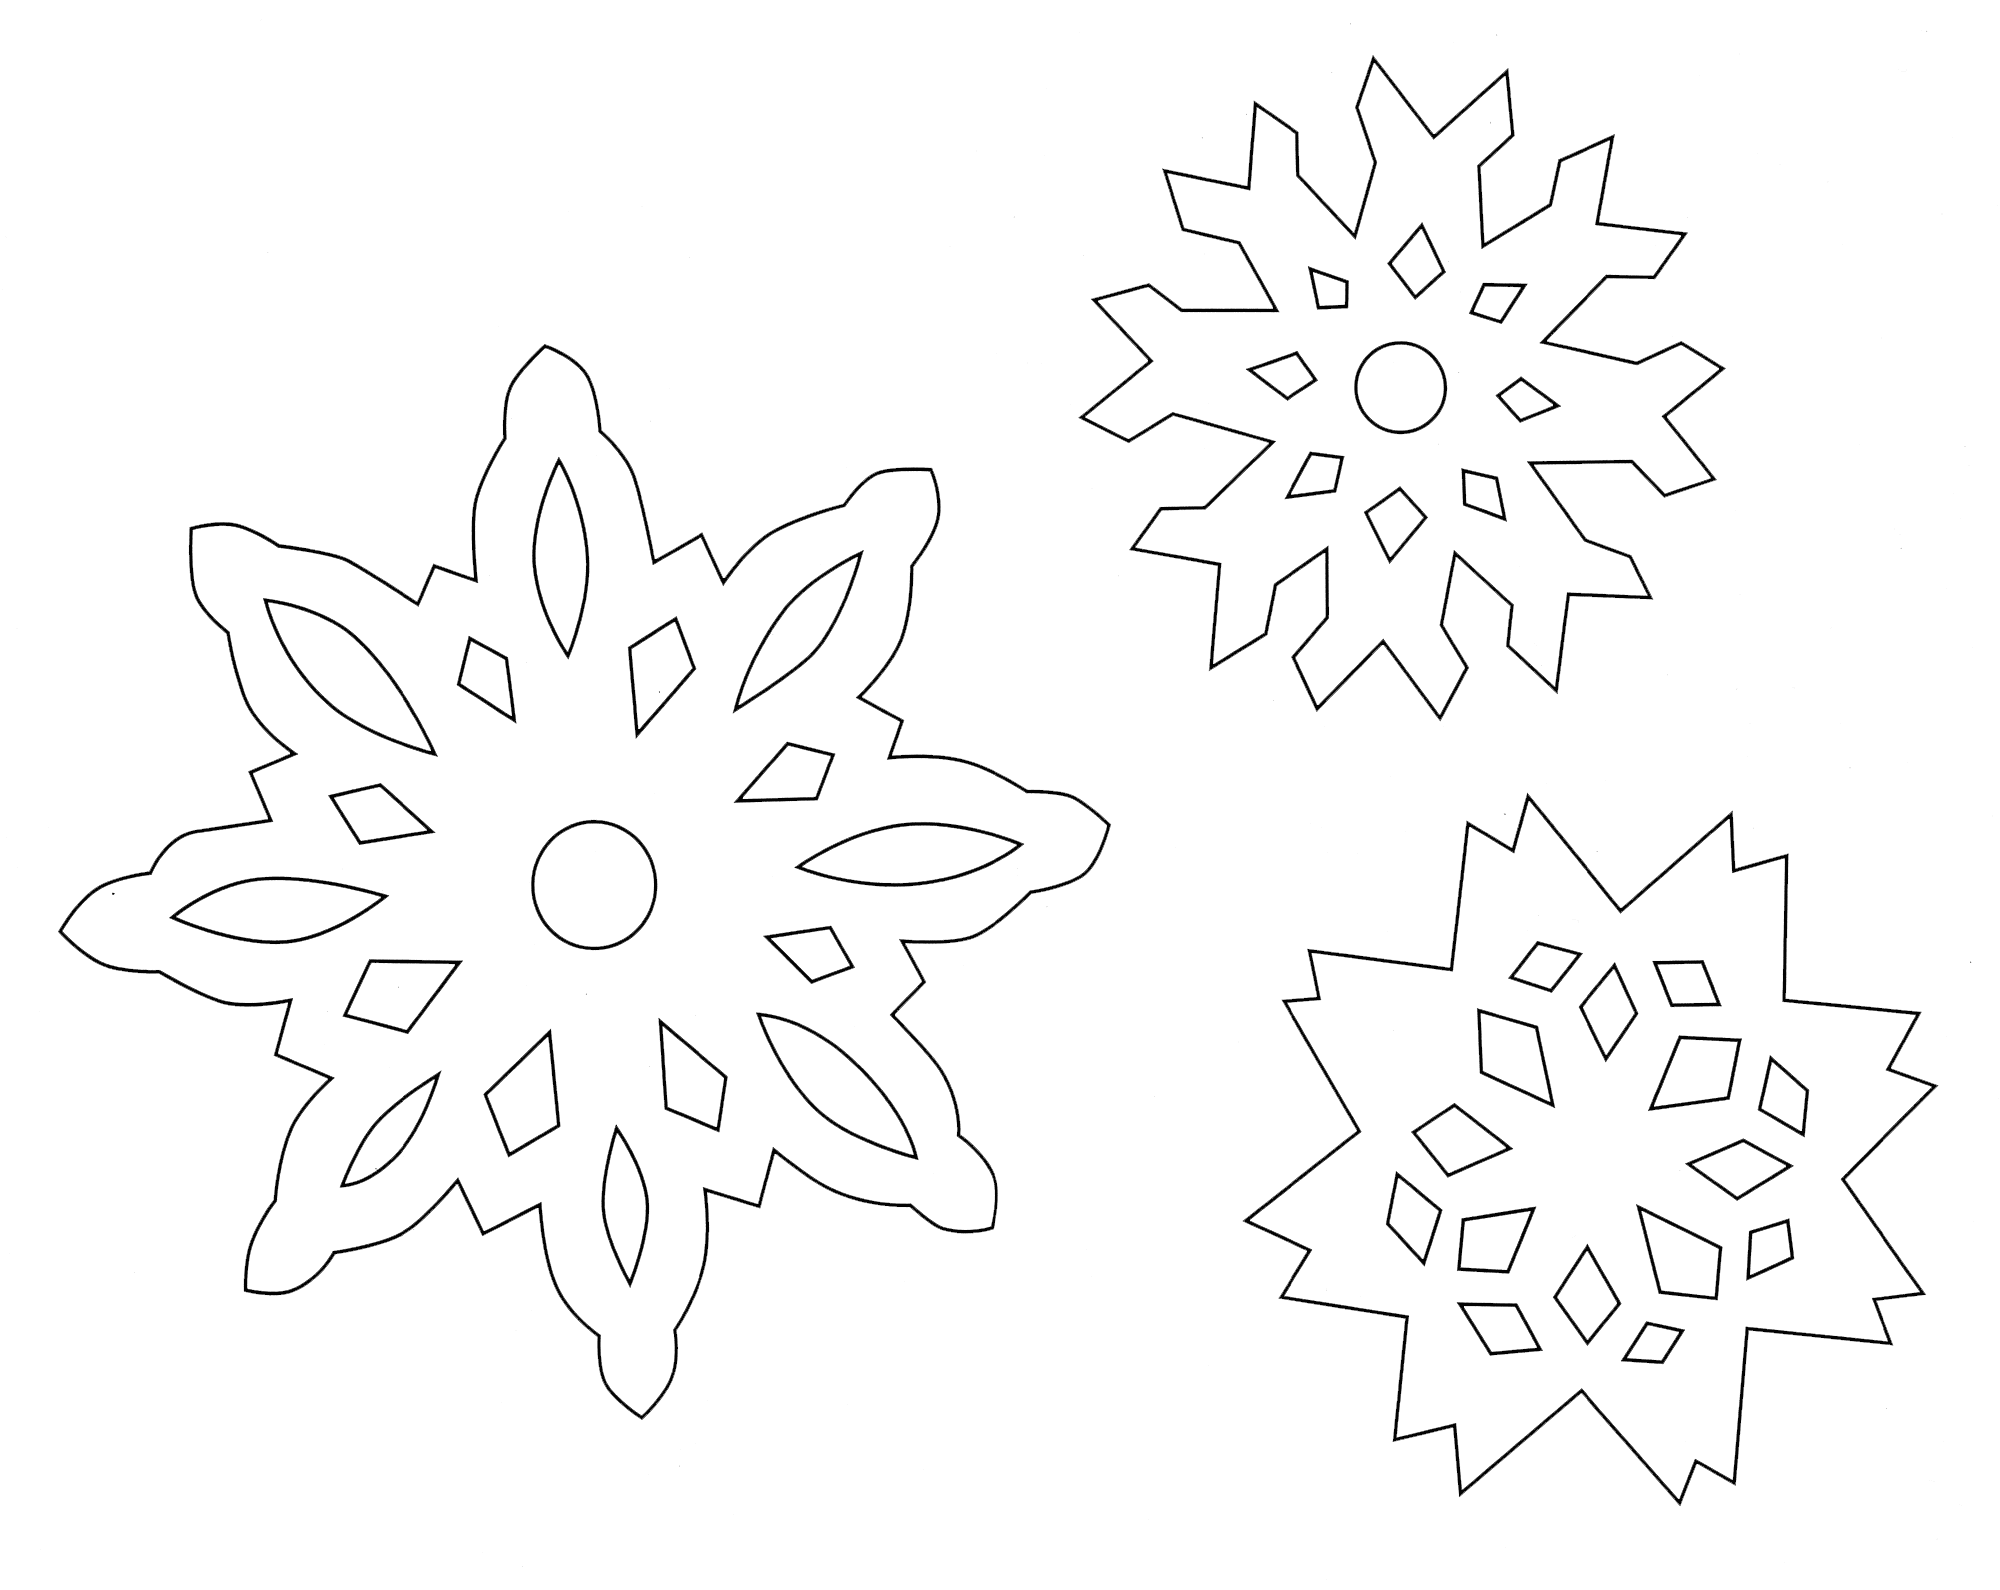 There are some excellent paper snowflake templates for decorating the home for christmas. Free Snowflake Patterns To Trace Download Free Snowflake Patterns To Trace Png Images Free Cliparts On Clipart Library